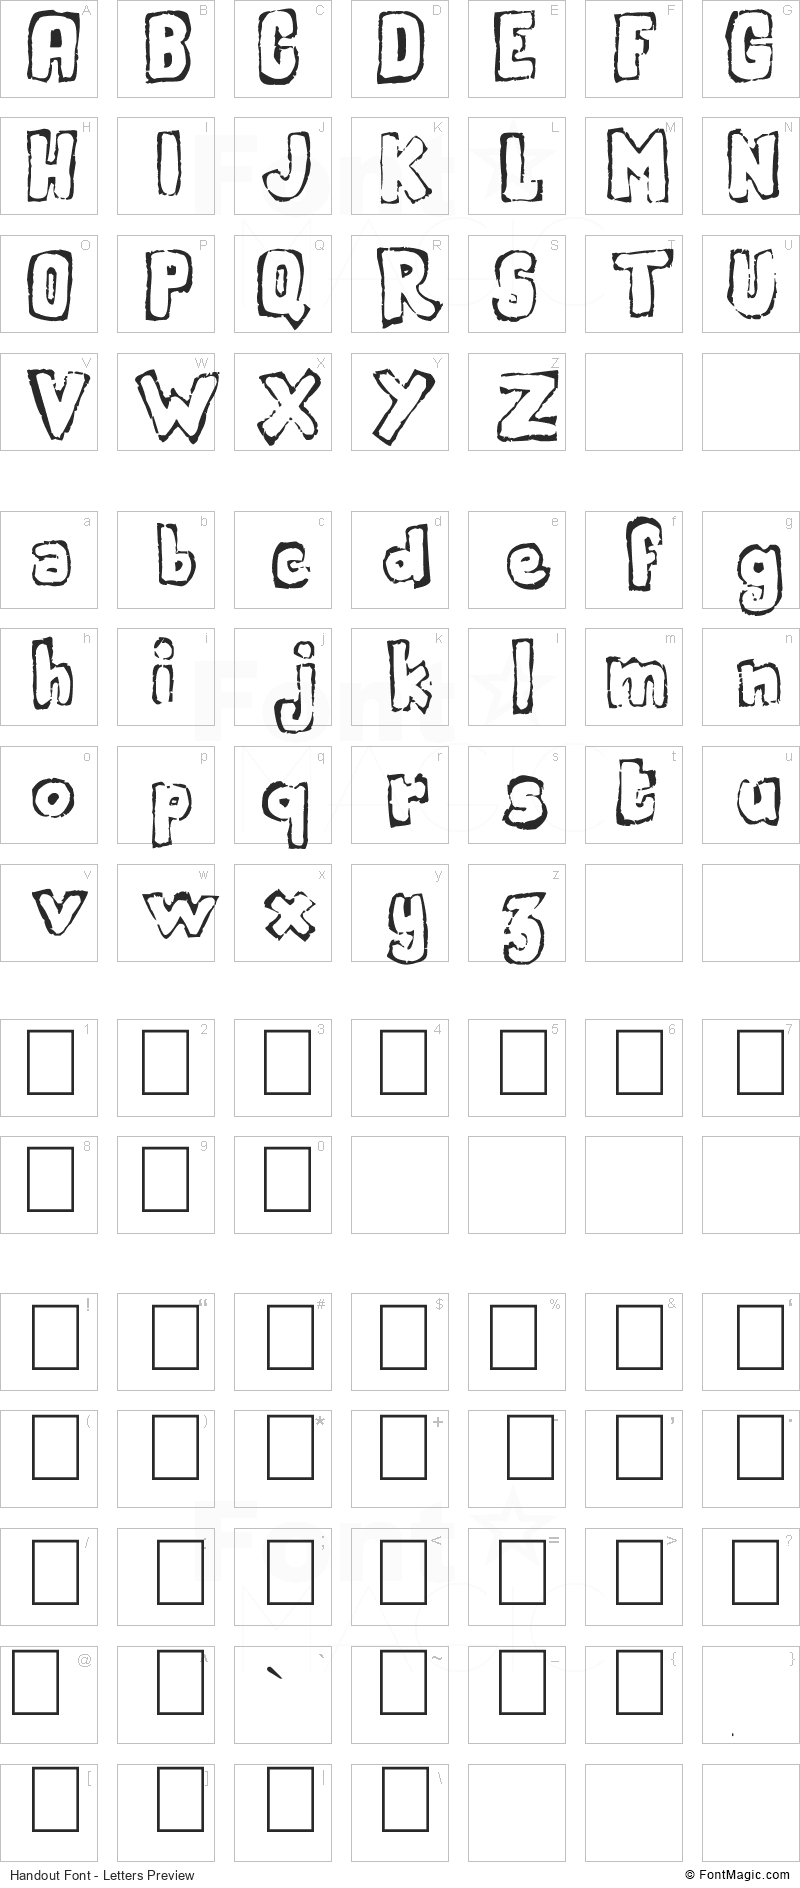 Handout Font - All Latters Preview Chart